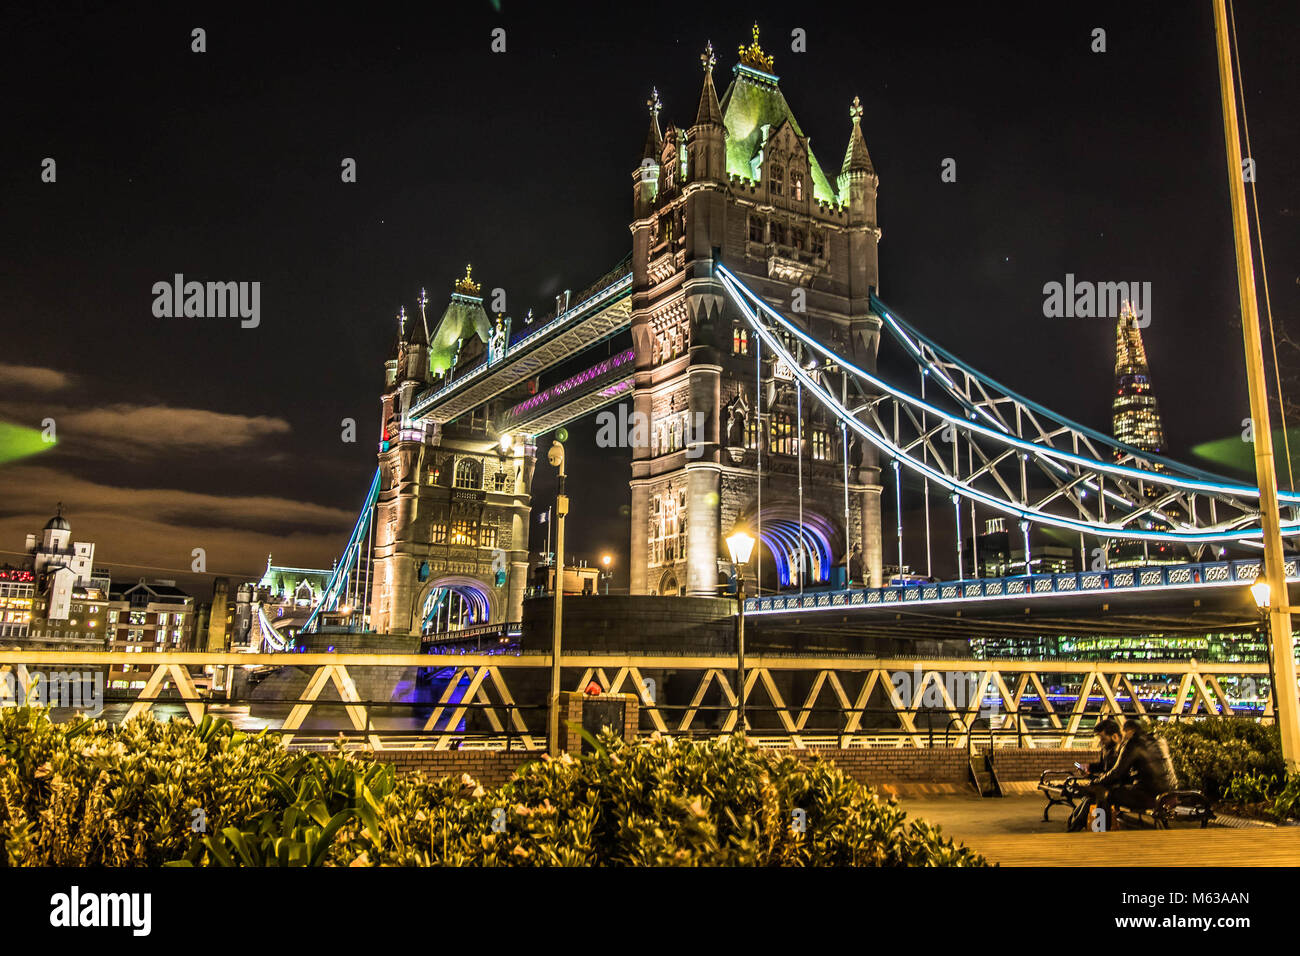 London's Tower Bridge at Night Banque D'Images